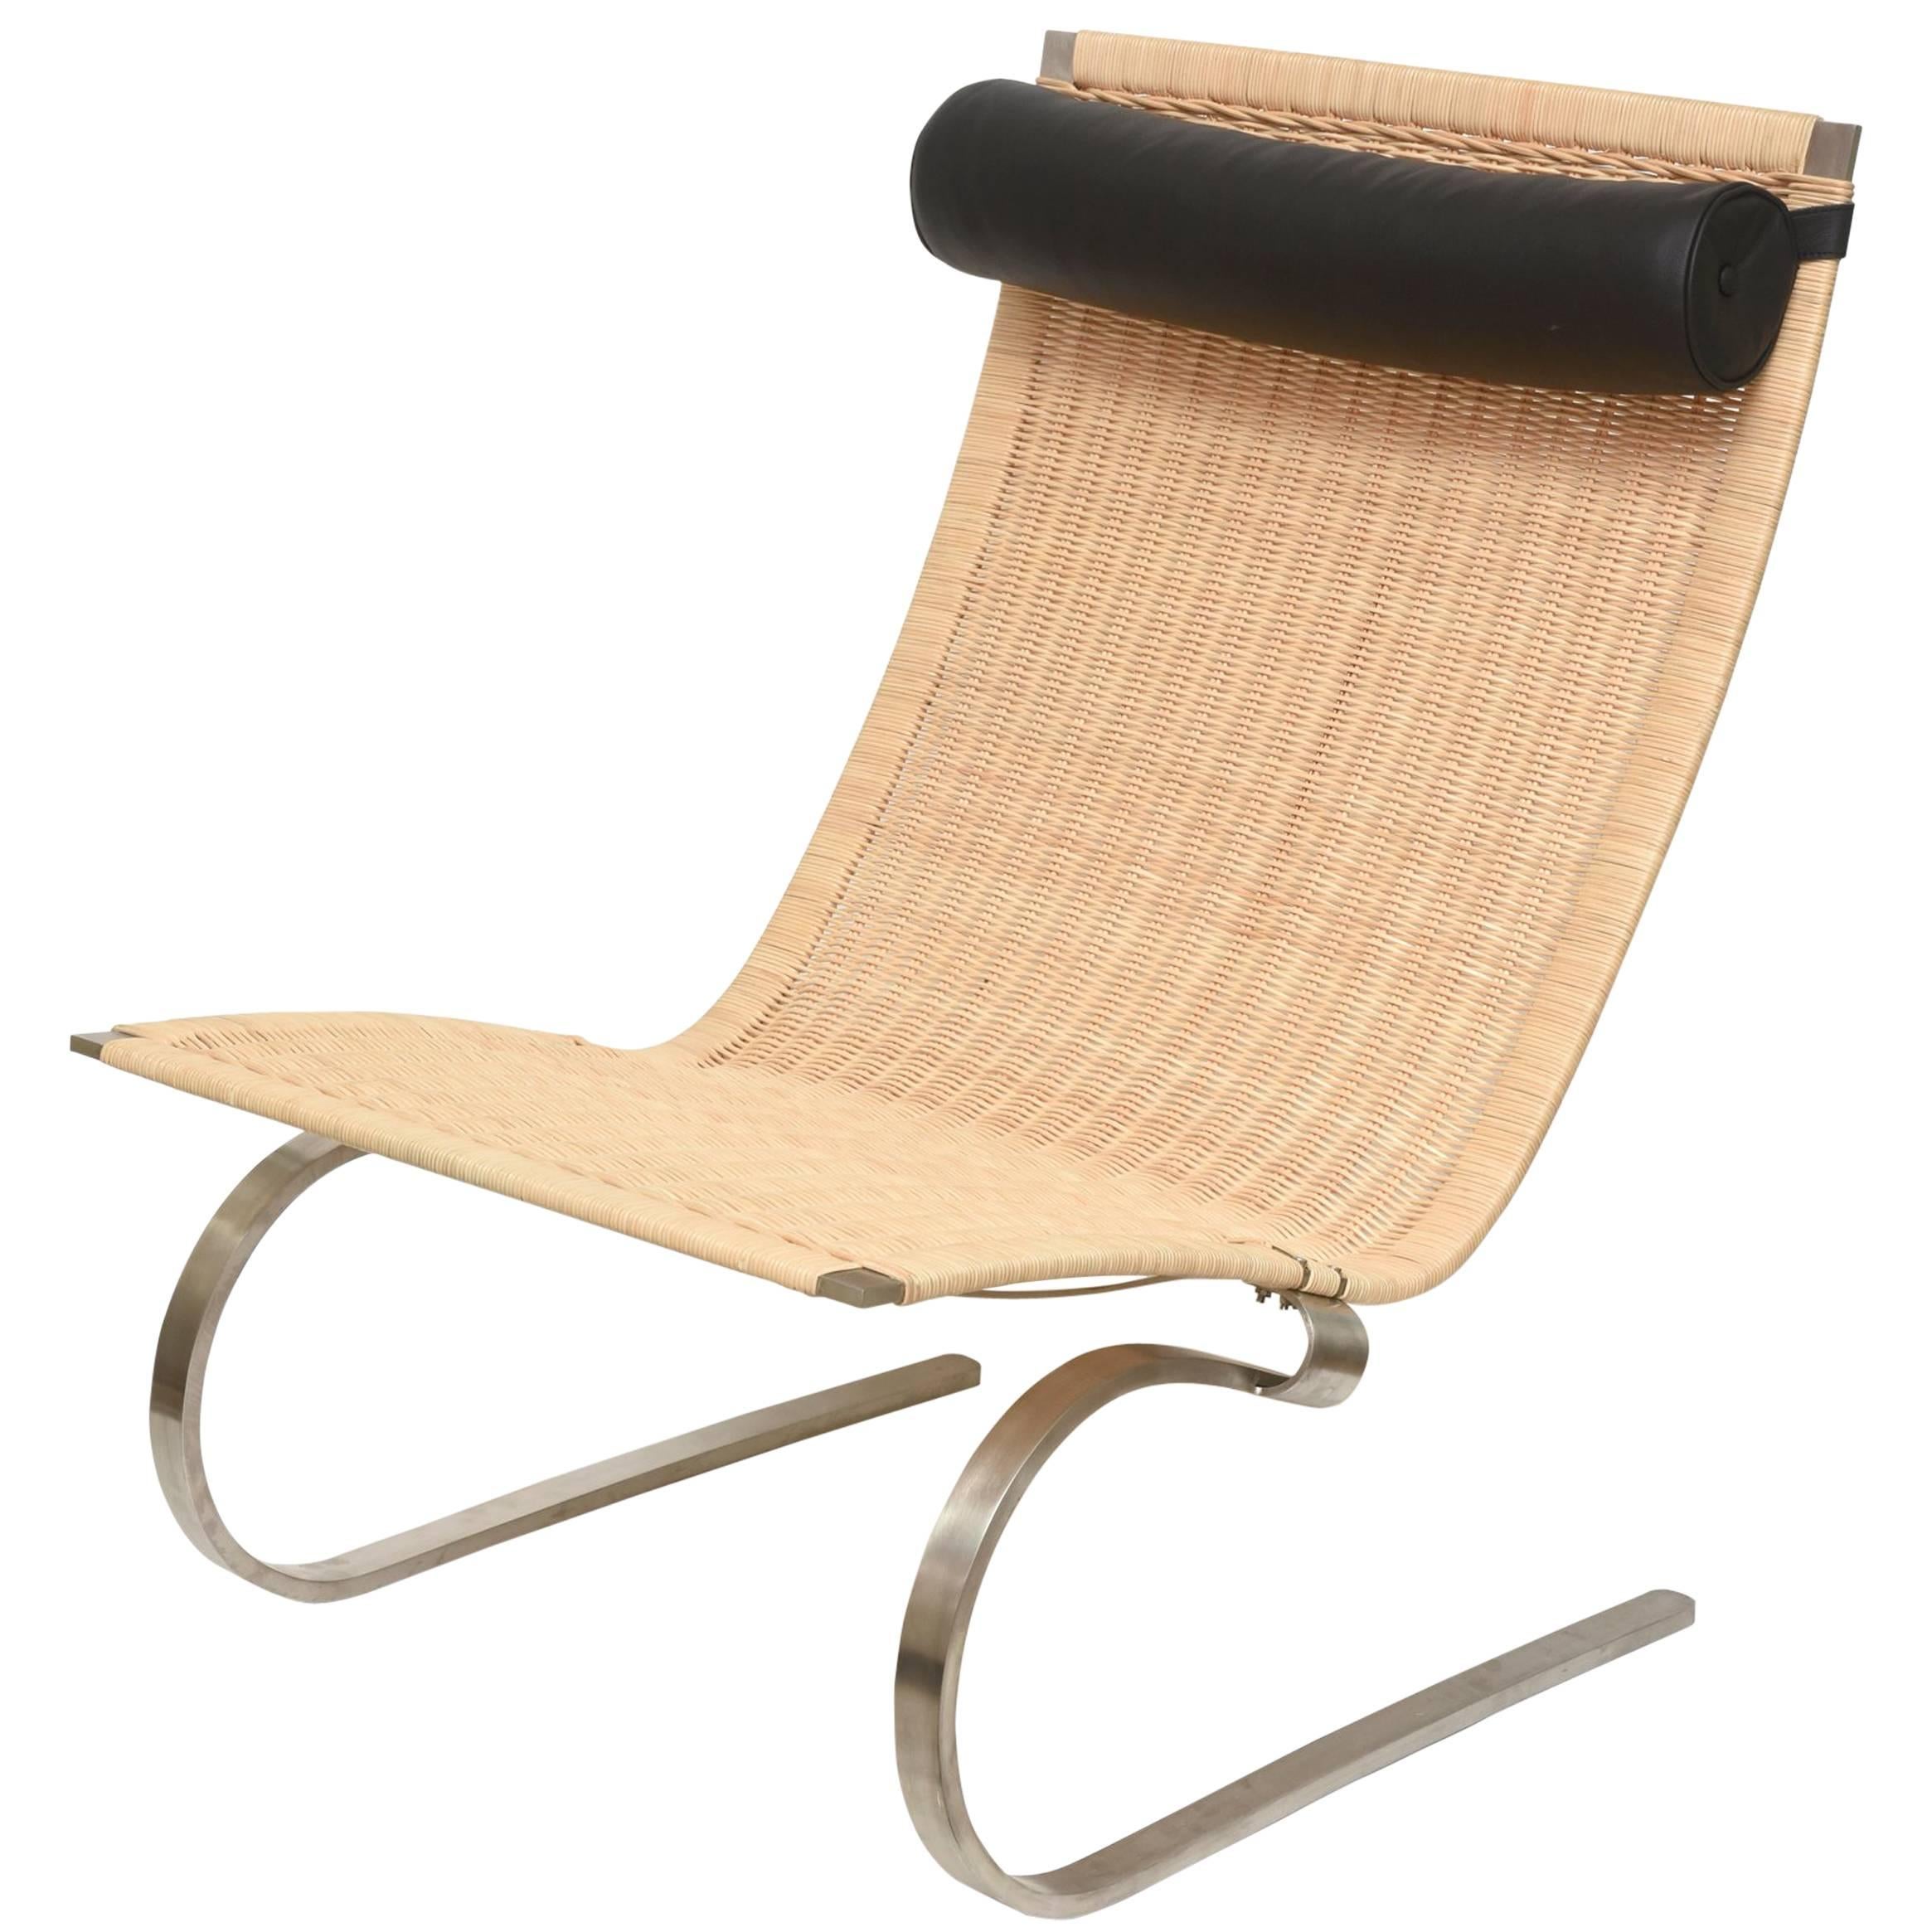 Poul Kjaerholm PK20 Cantiliver Stainless Steel, Cane and Leather Lounge Chair